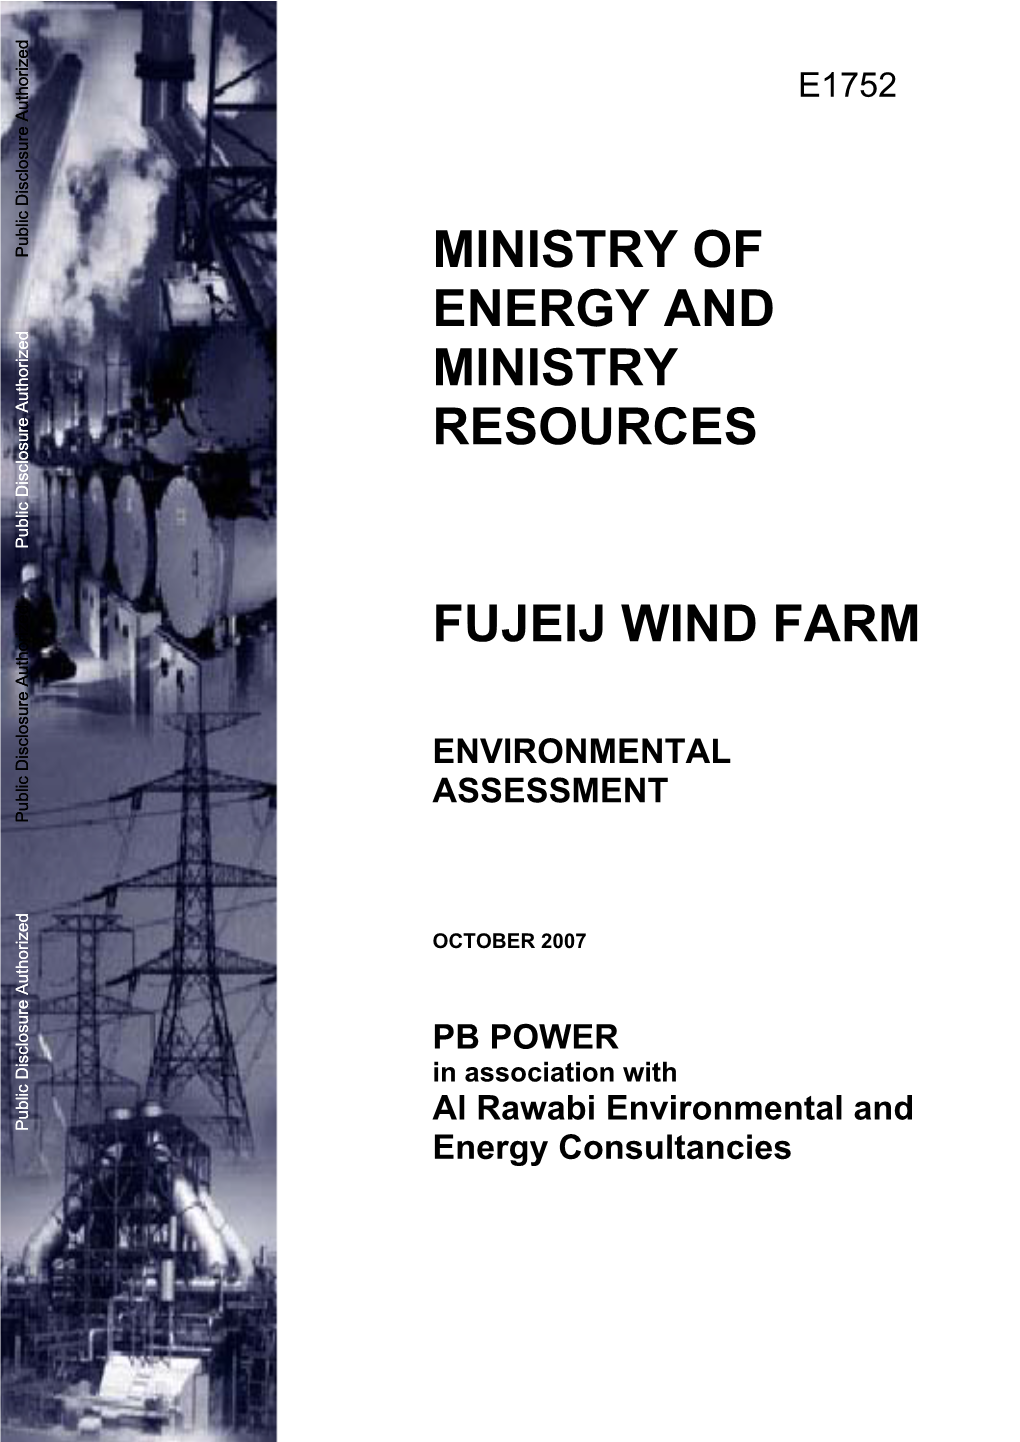 Ministry of Energy and Ministry Resources